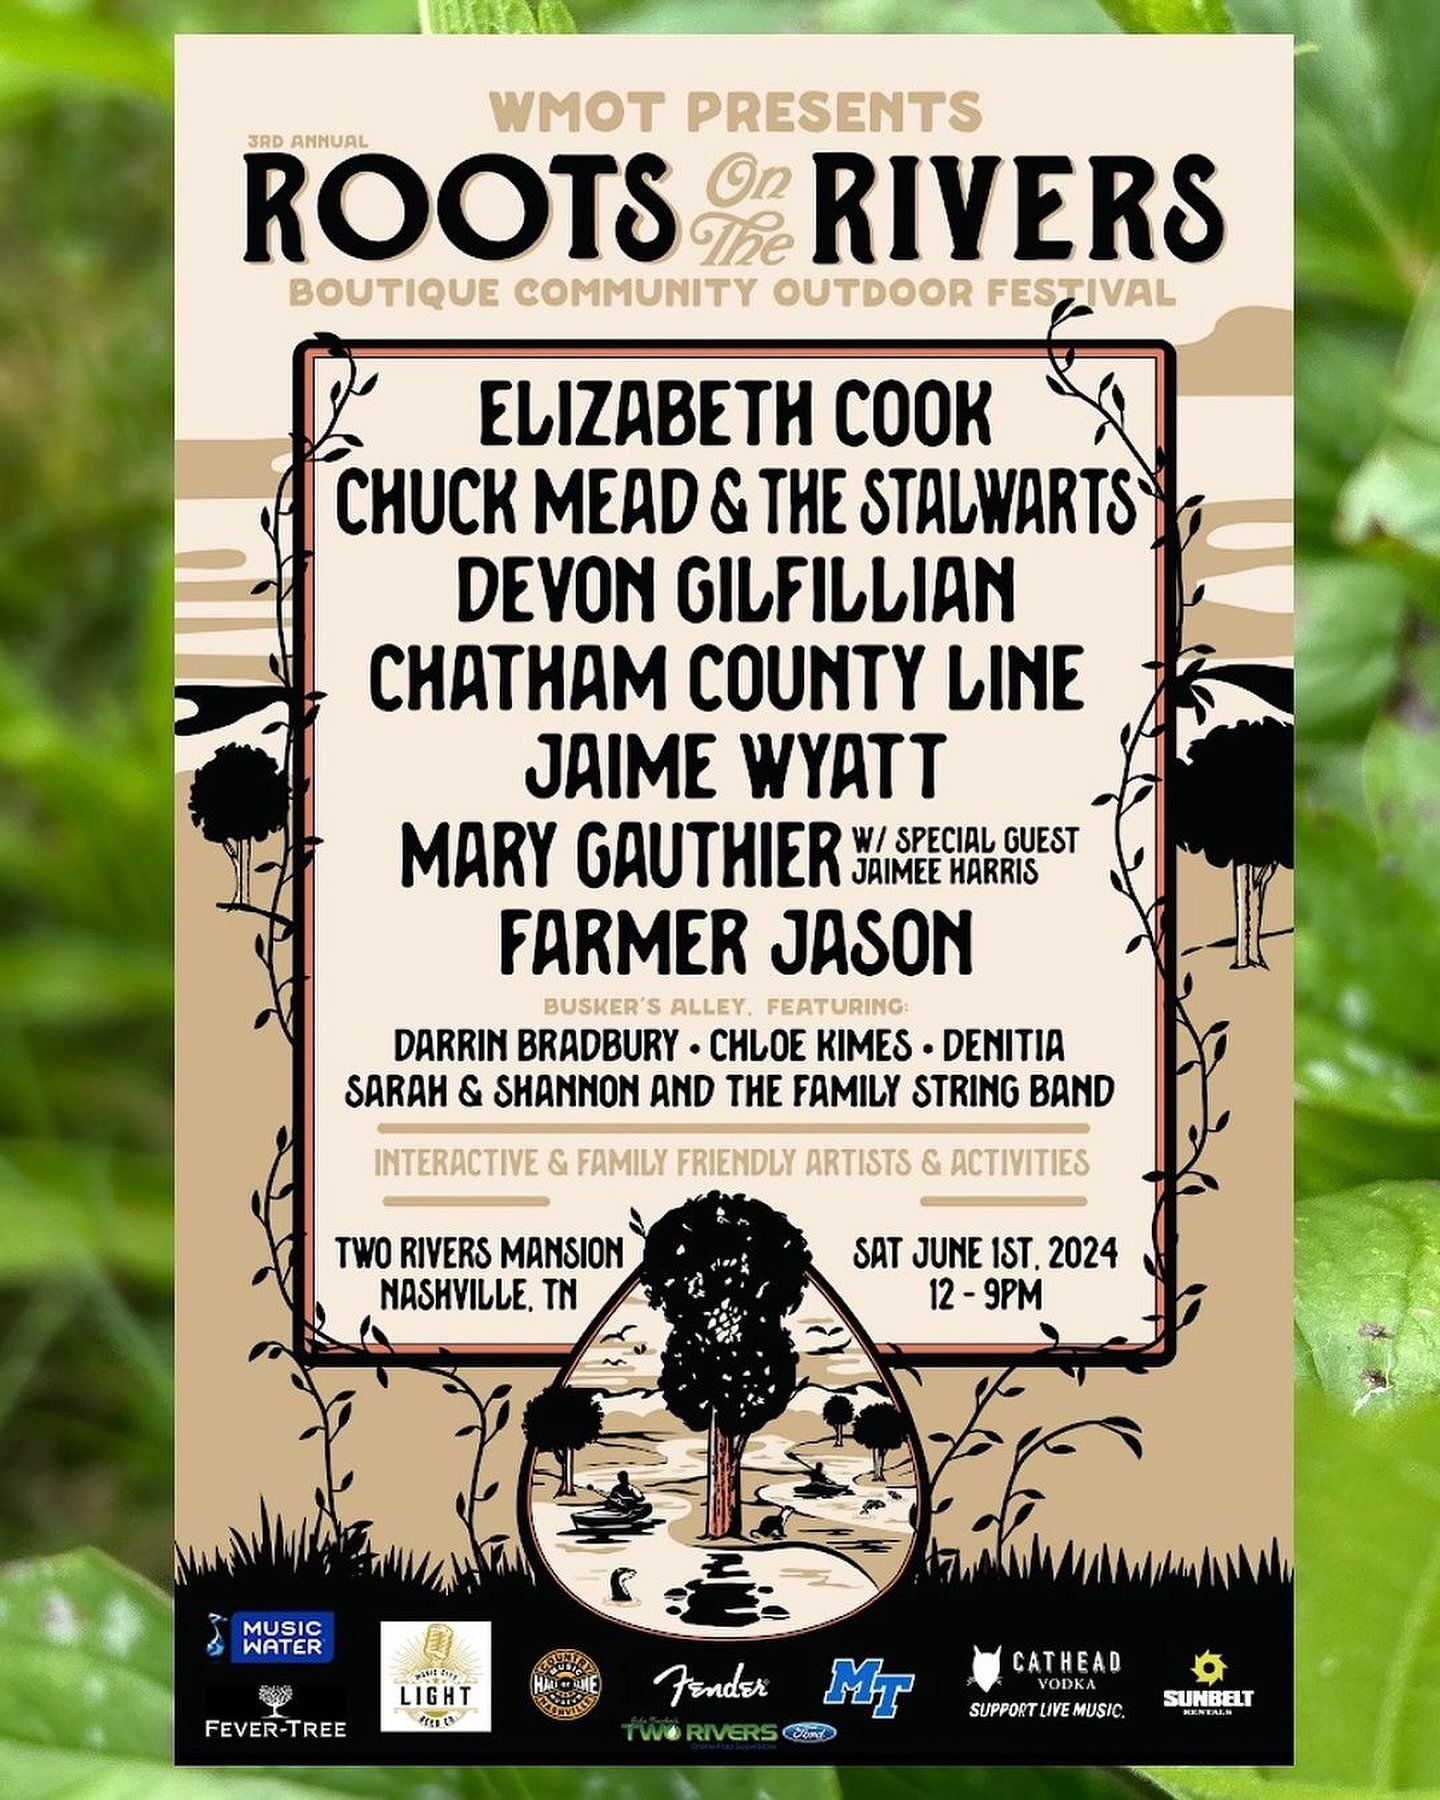 🚨Nashville! CCL is coming to the Music City THIS Saturday, June 1st for @rootsradiowmot 3rd Annual Roots on the Rivers Festival at Two Rivers Mansion. CCL hits the stage at 4:15pm. It&rsquo;s an awesome lineup and you need to be there! 
Details and 